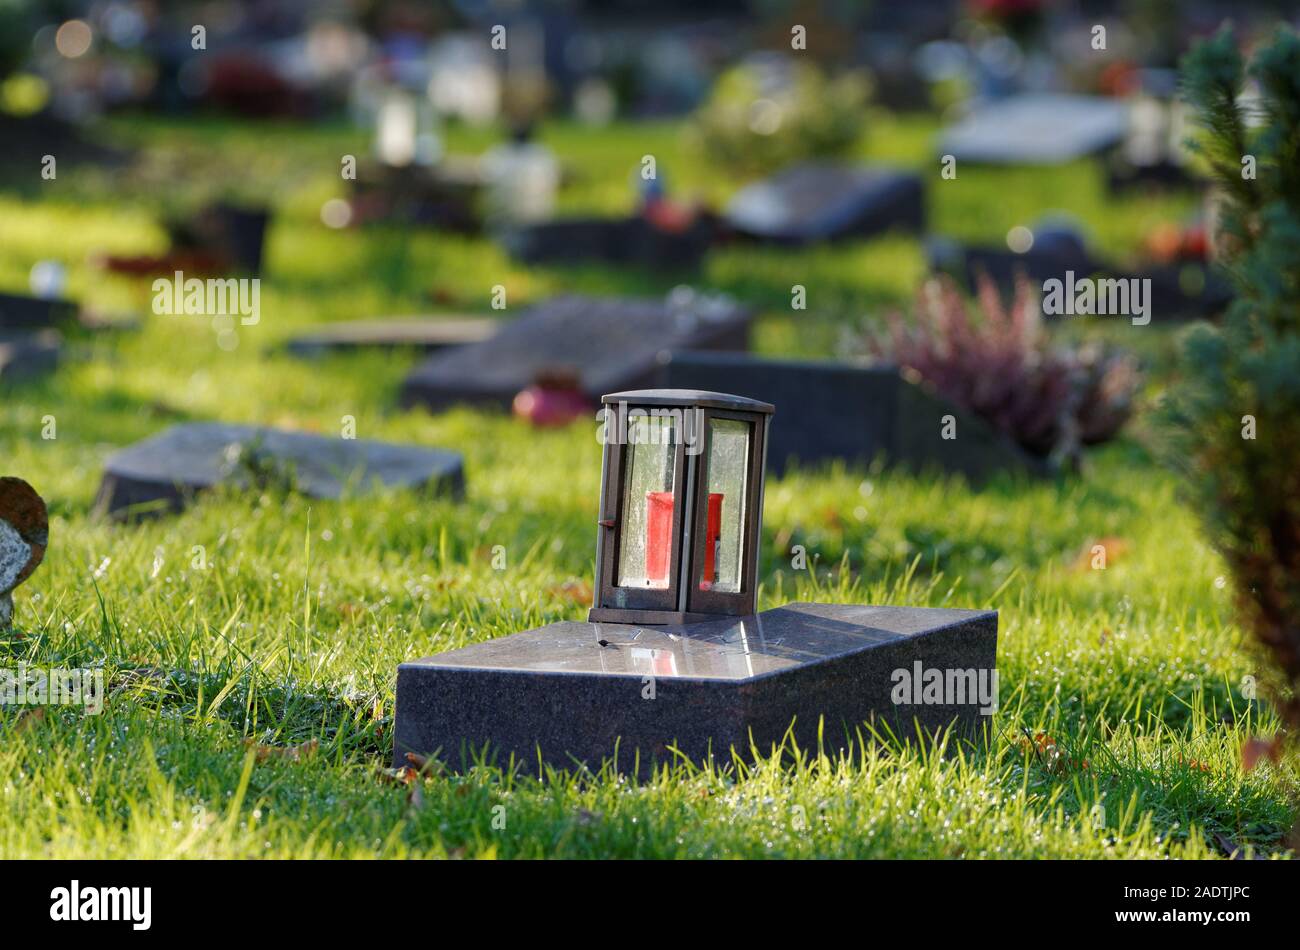 lantern on a gravestone of a cemetery with pauper graves against blurred background Stock Photo